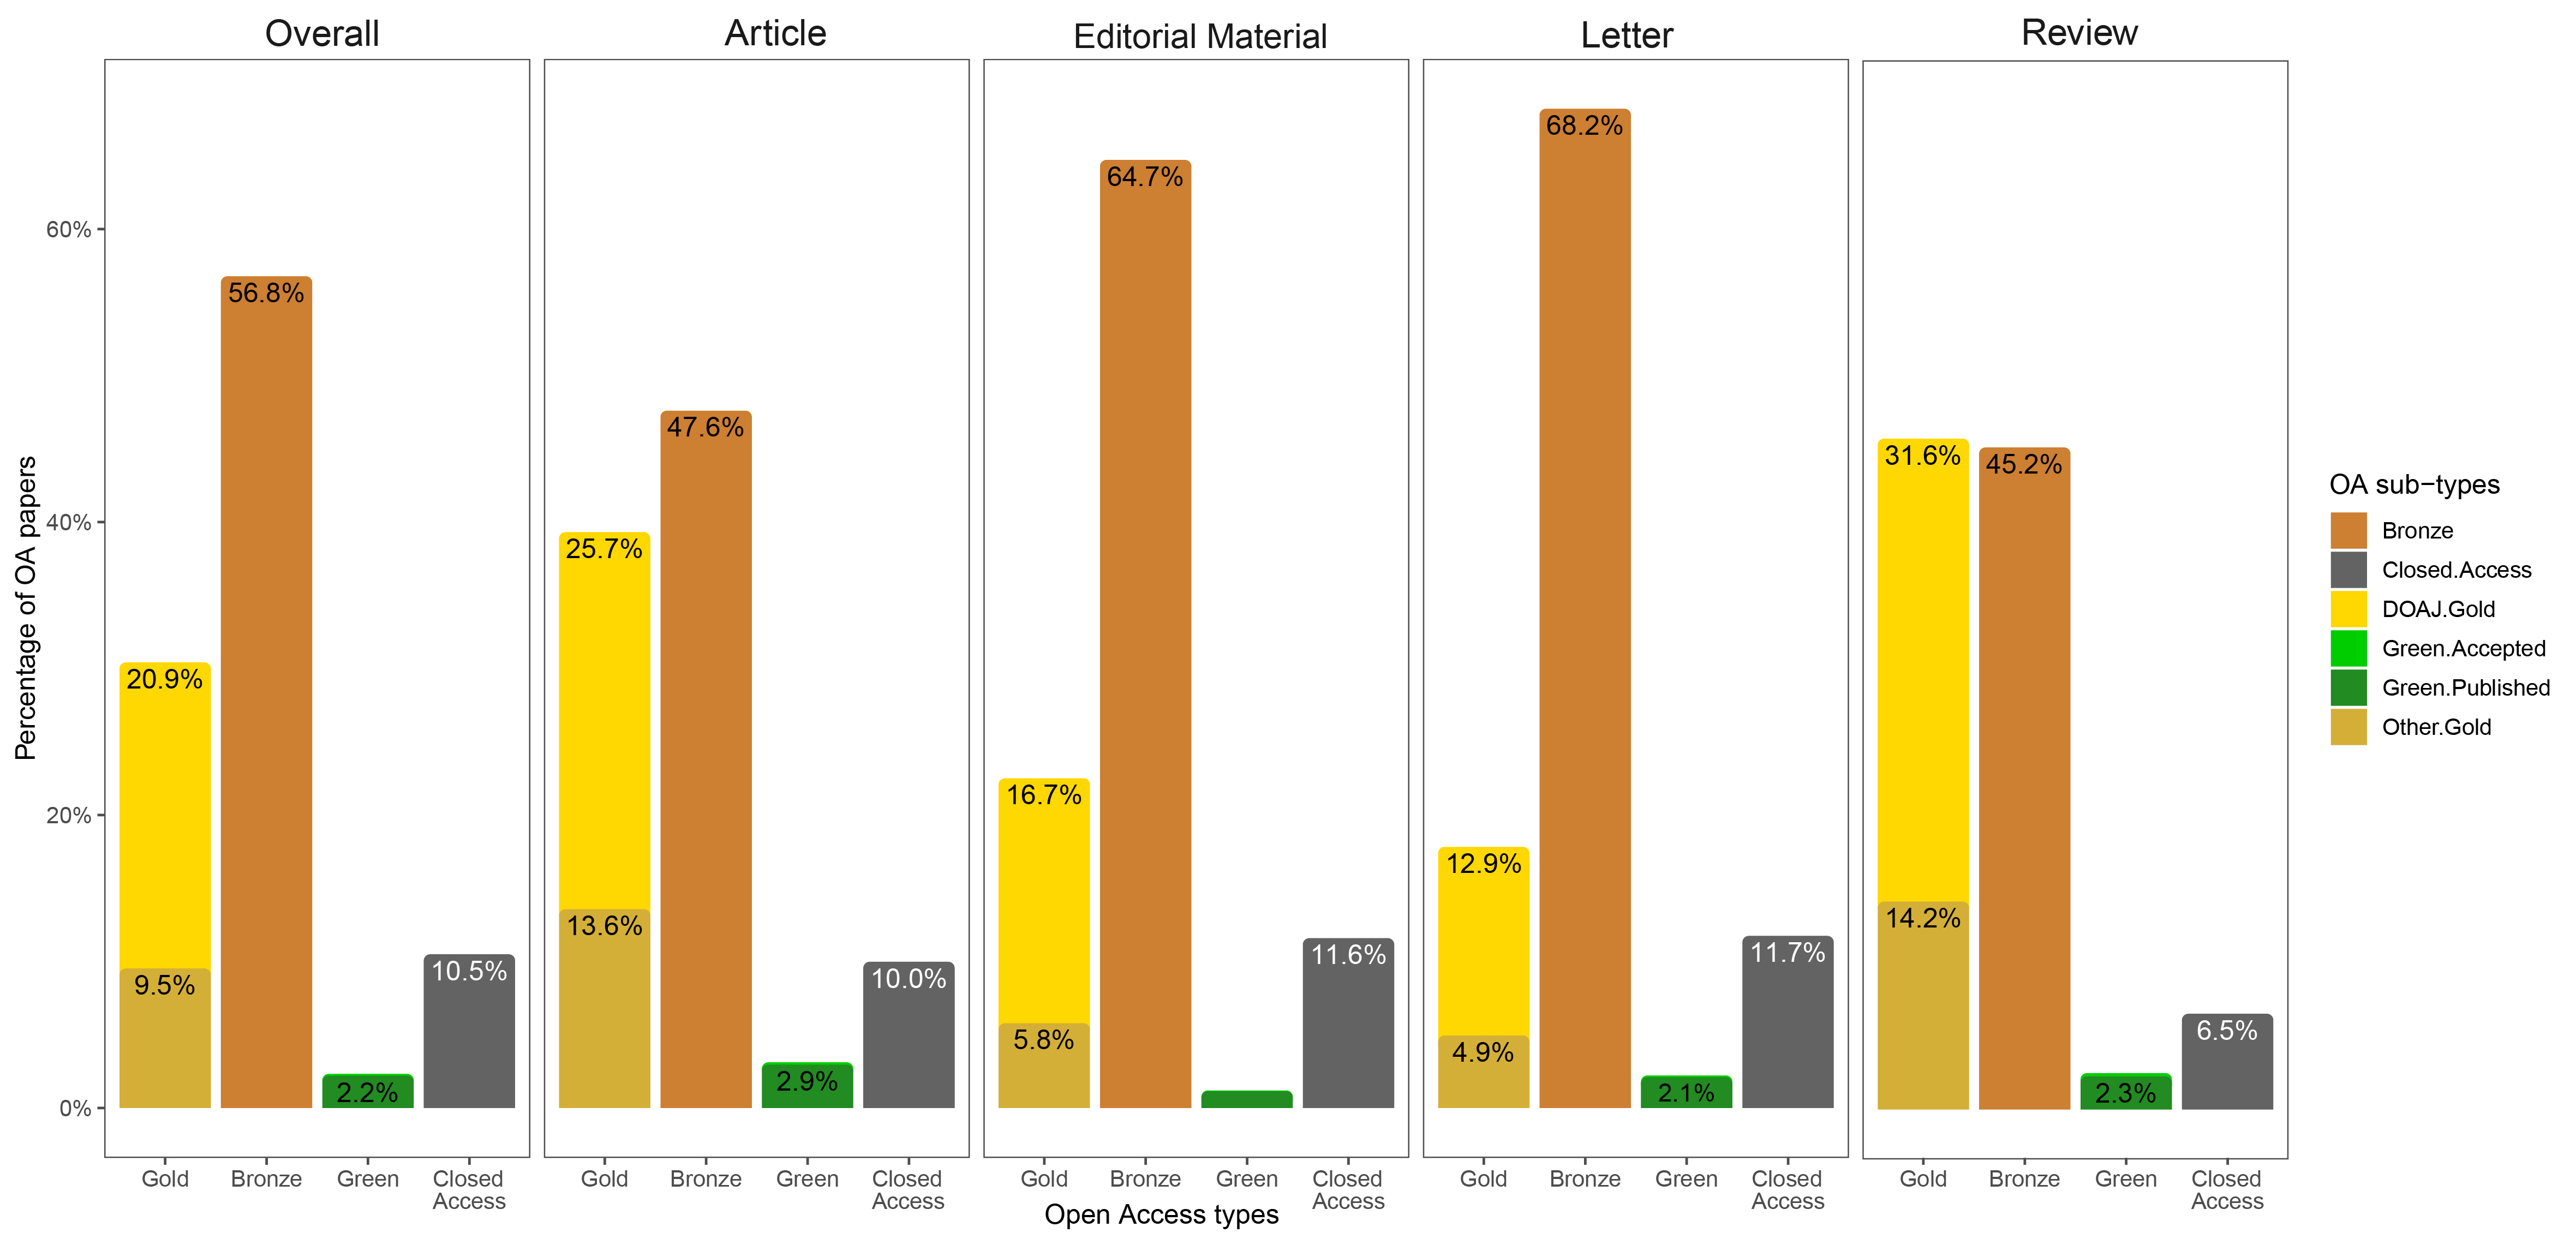 Figure 1: Rates for papers on COVID-19 published with gold, bronze and green open access status